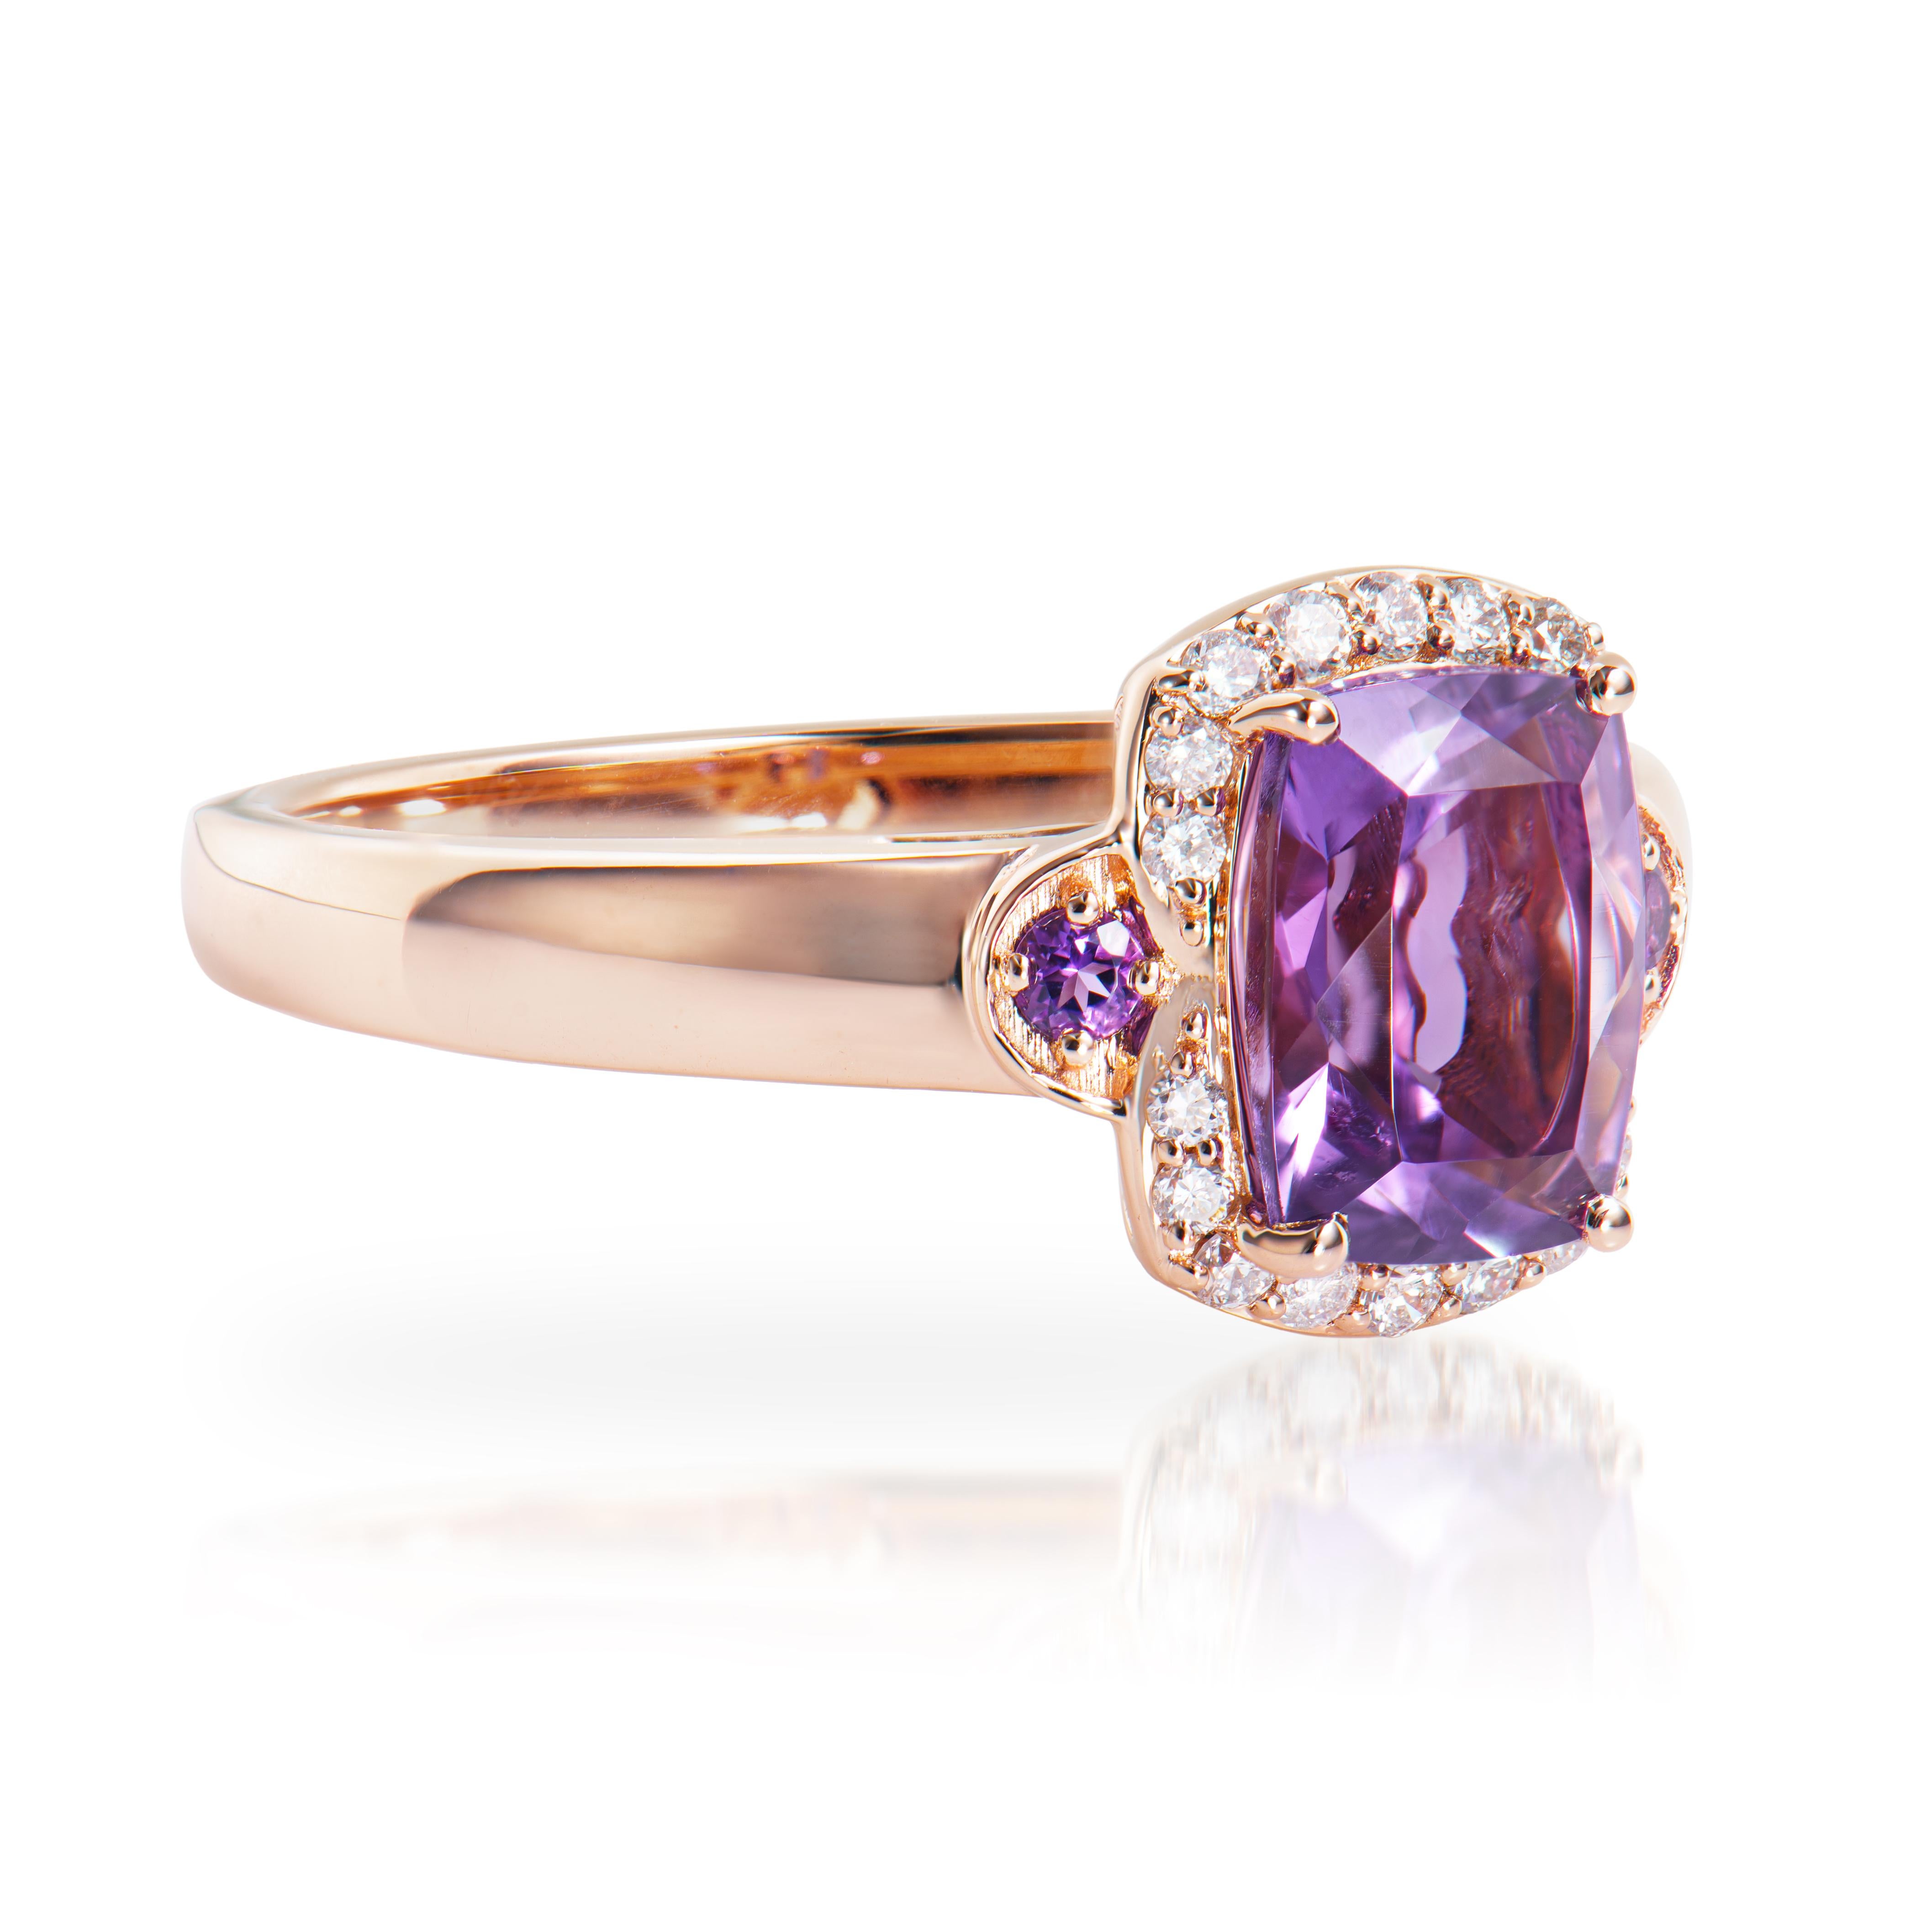 Presented A stunning variety of amethyst gemstones for those who respect quality and wish to wear them on any occasion or everyday basis. The rose gold amethyst fancy ring, embellished with diamonds, has a timeless and exquisite appeal.
  
Amethyst